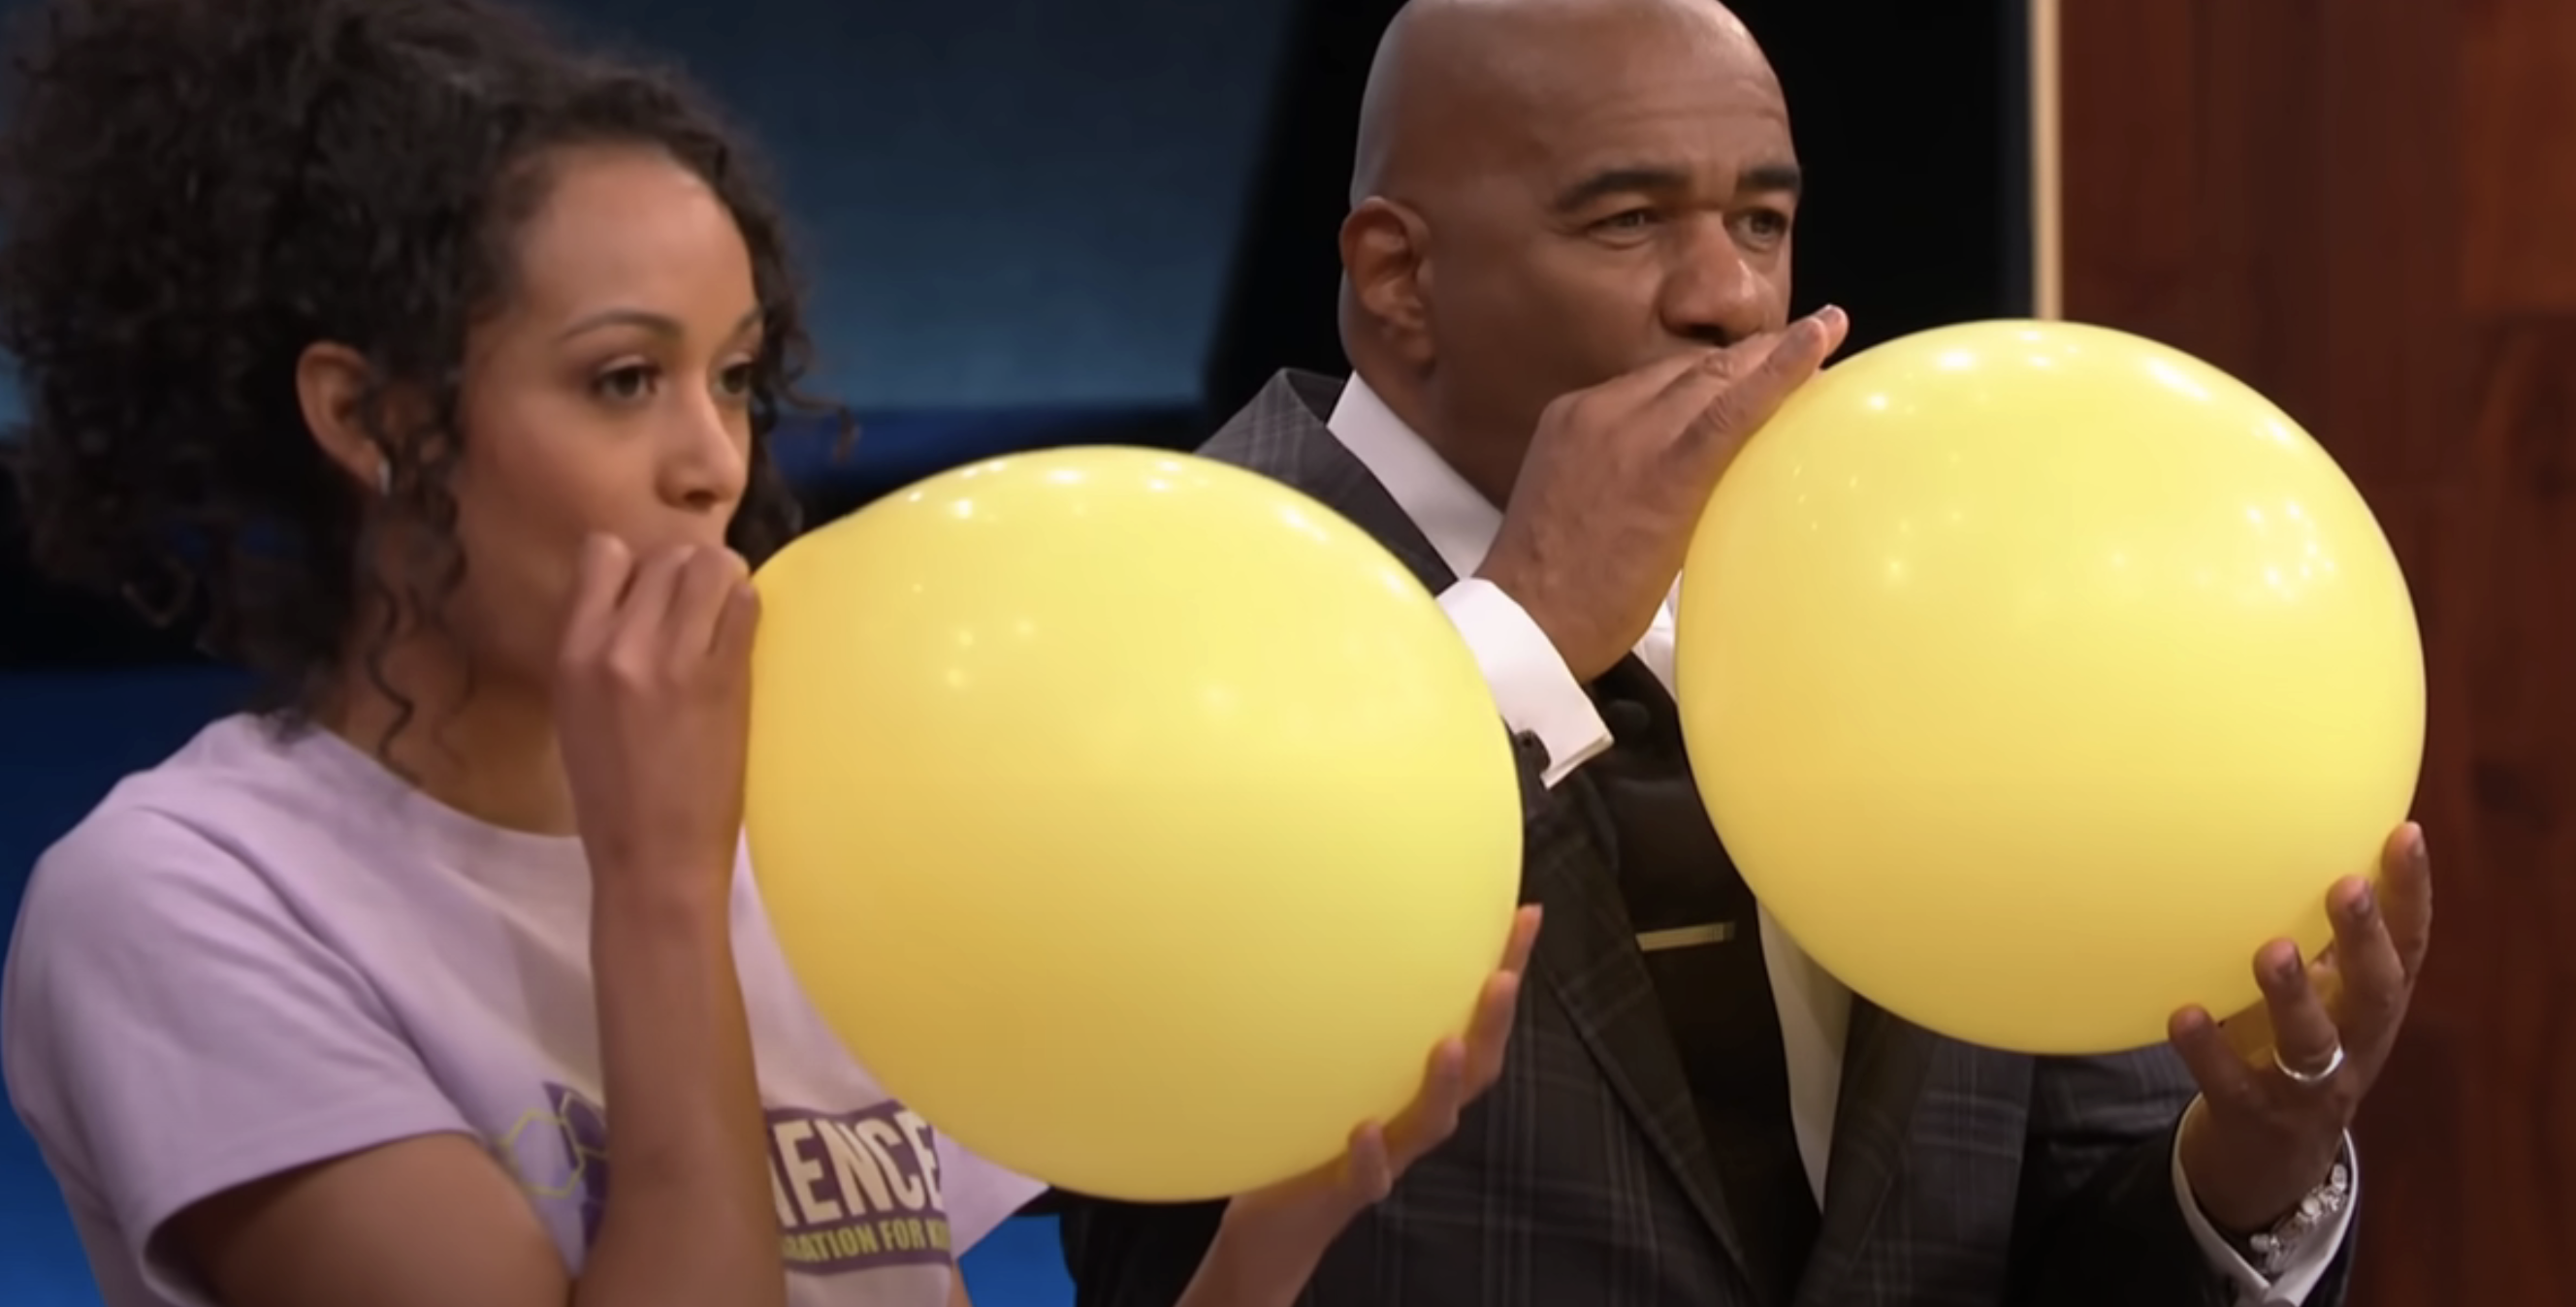 Two people holding large yellow balloons to their mouths, appearing to be inhaling from them